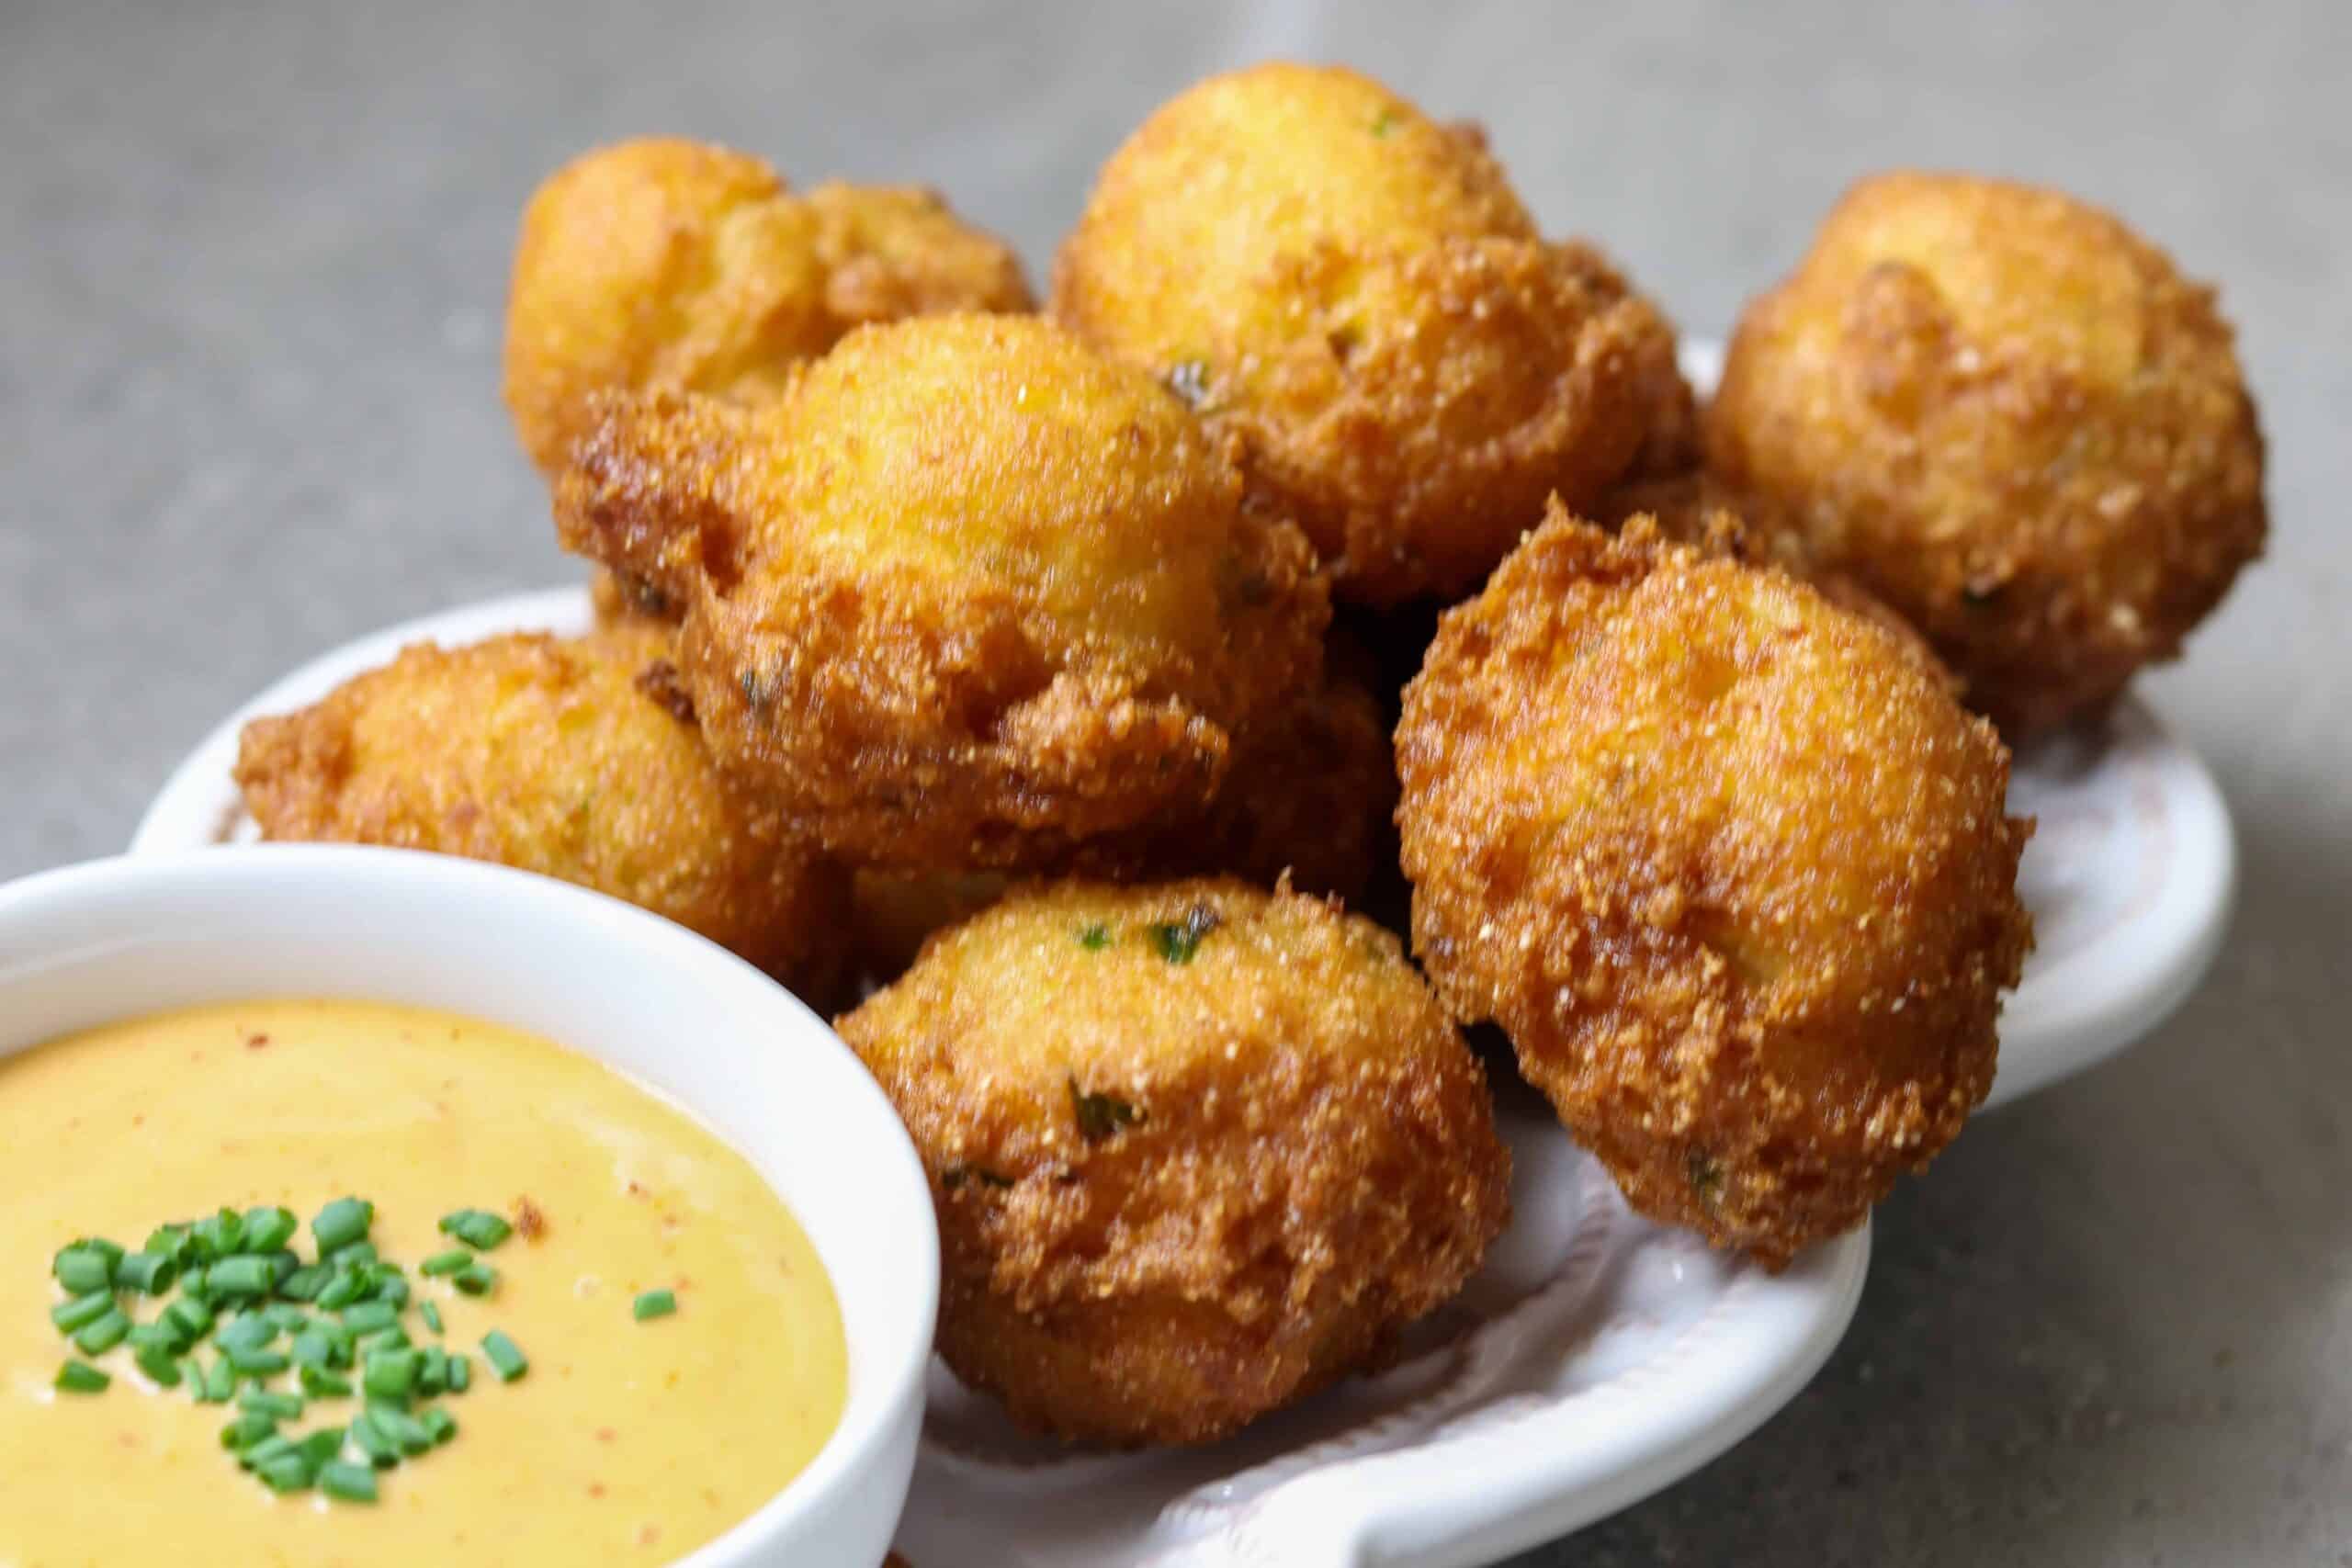 A plate of hush puppies and dip.